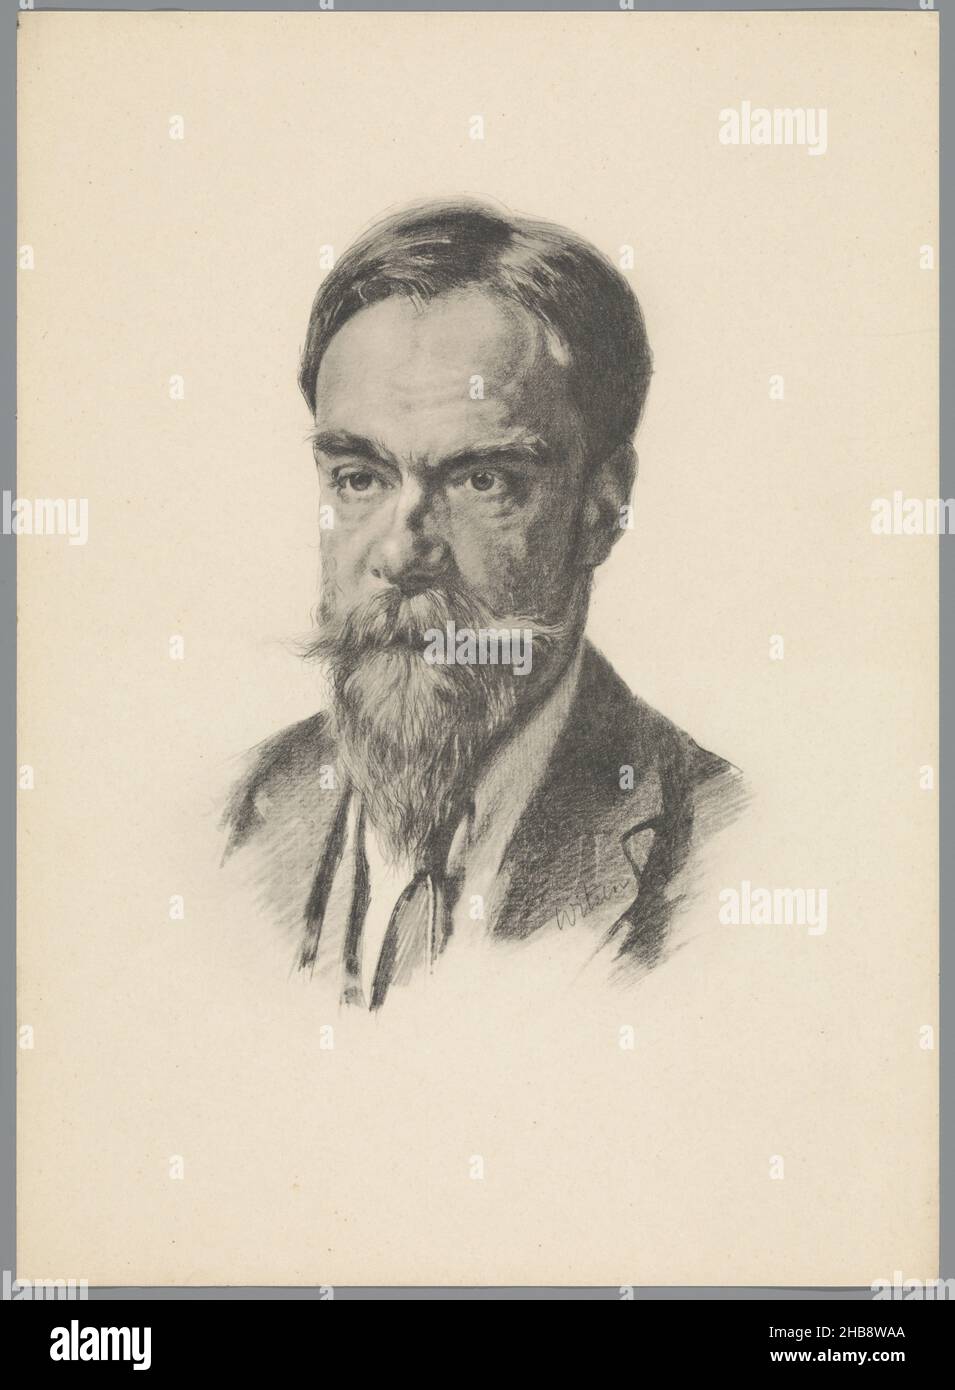 Reproduction to chalk drawing with portrait of Frans Coenen Jr., print maker: anonymous, intermediary draughtsman: Willem Witsen, Netherlands, c. 1860 - c. 1915, paper, collotype, width 359 mm × height 260 mm Stock Photo